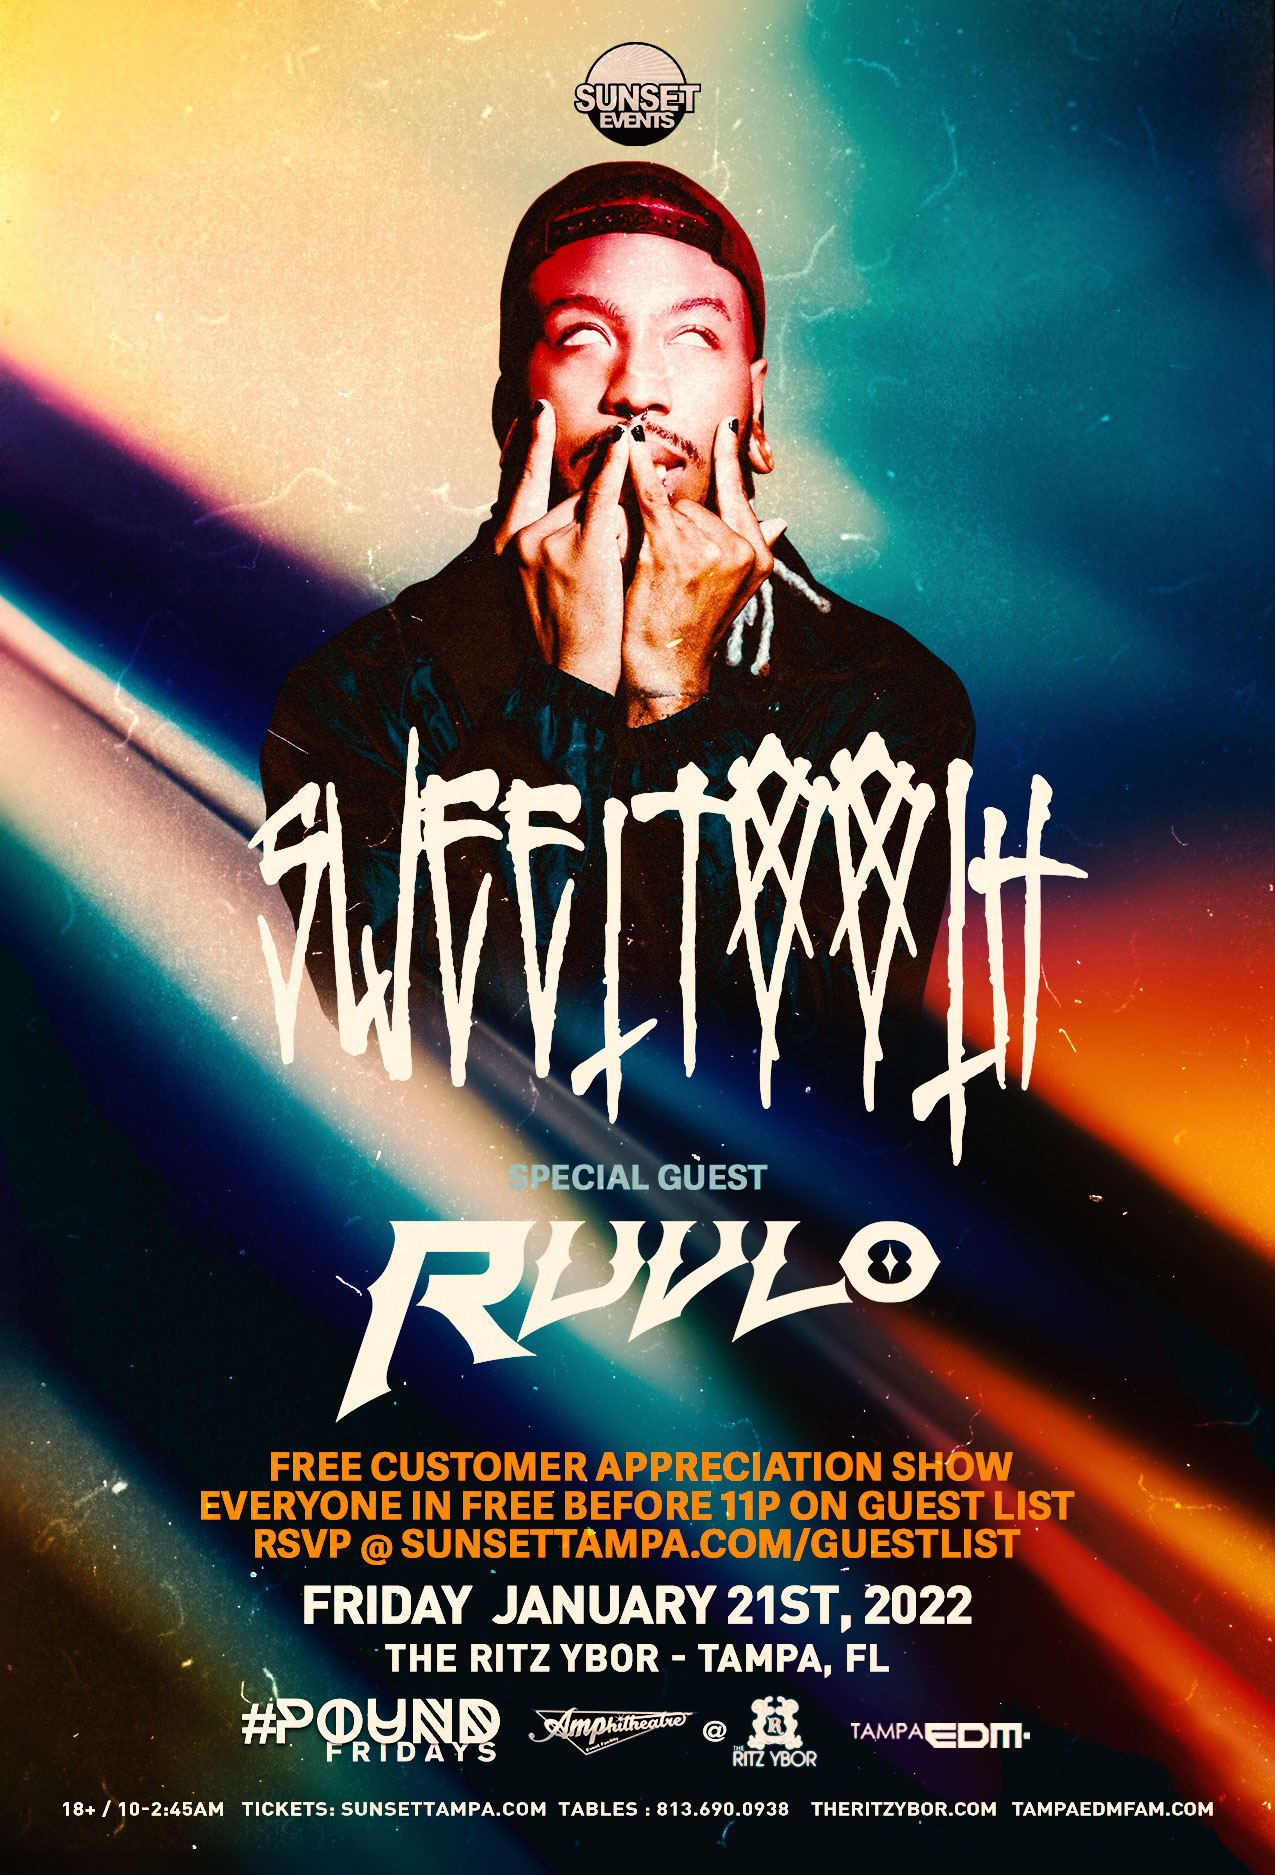 SWEETTOOTH & RUVLO for #POUND Fridays at The RITZ Ybor – 1/21/2022